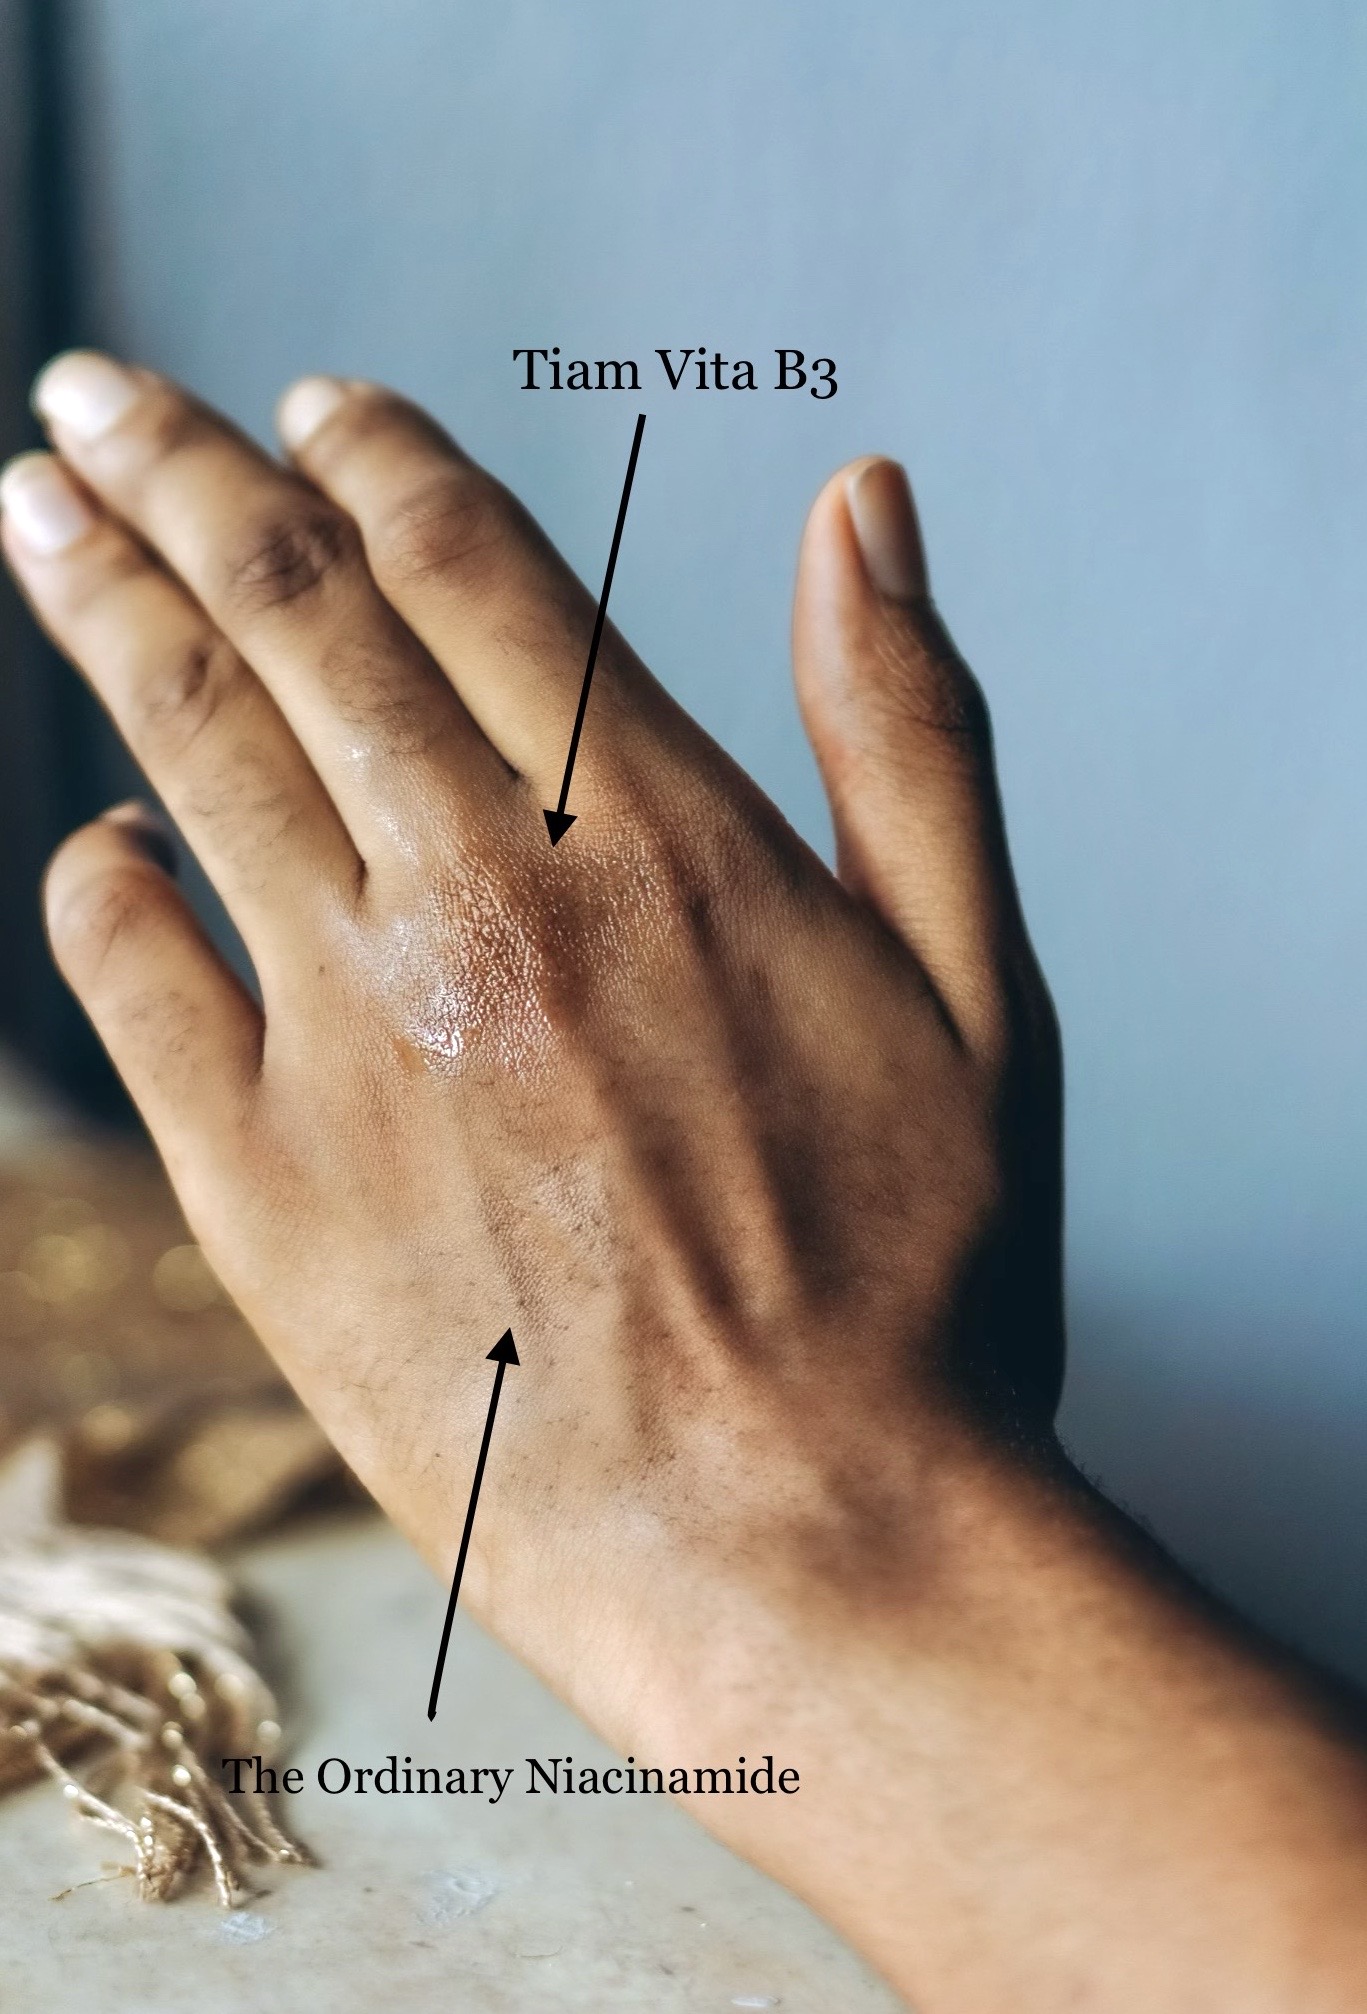 Picture of the back of Cassie Daves hand with a drop of both the tiam vita b3 source vs the ordinary niacinamide serum